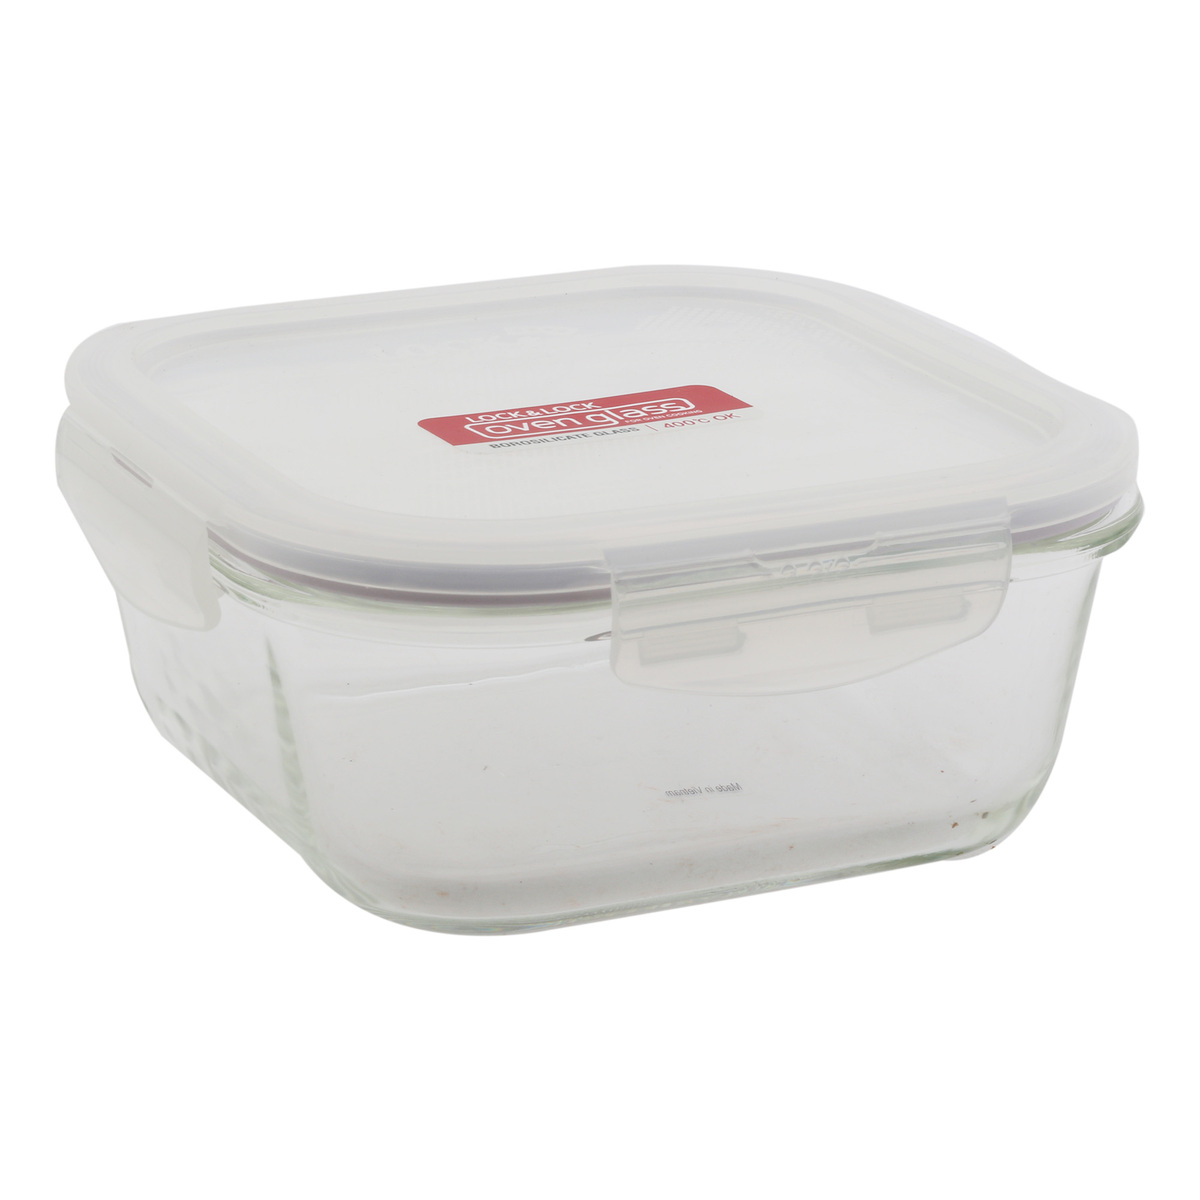 Lock & Lock Square Glass Container HLLG224 750ml